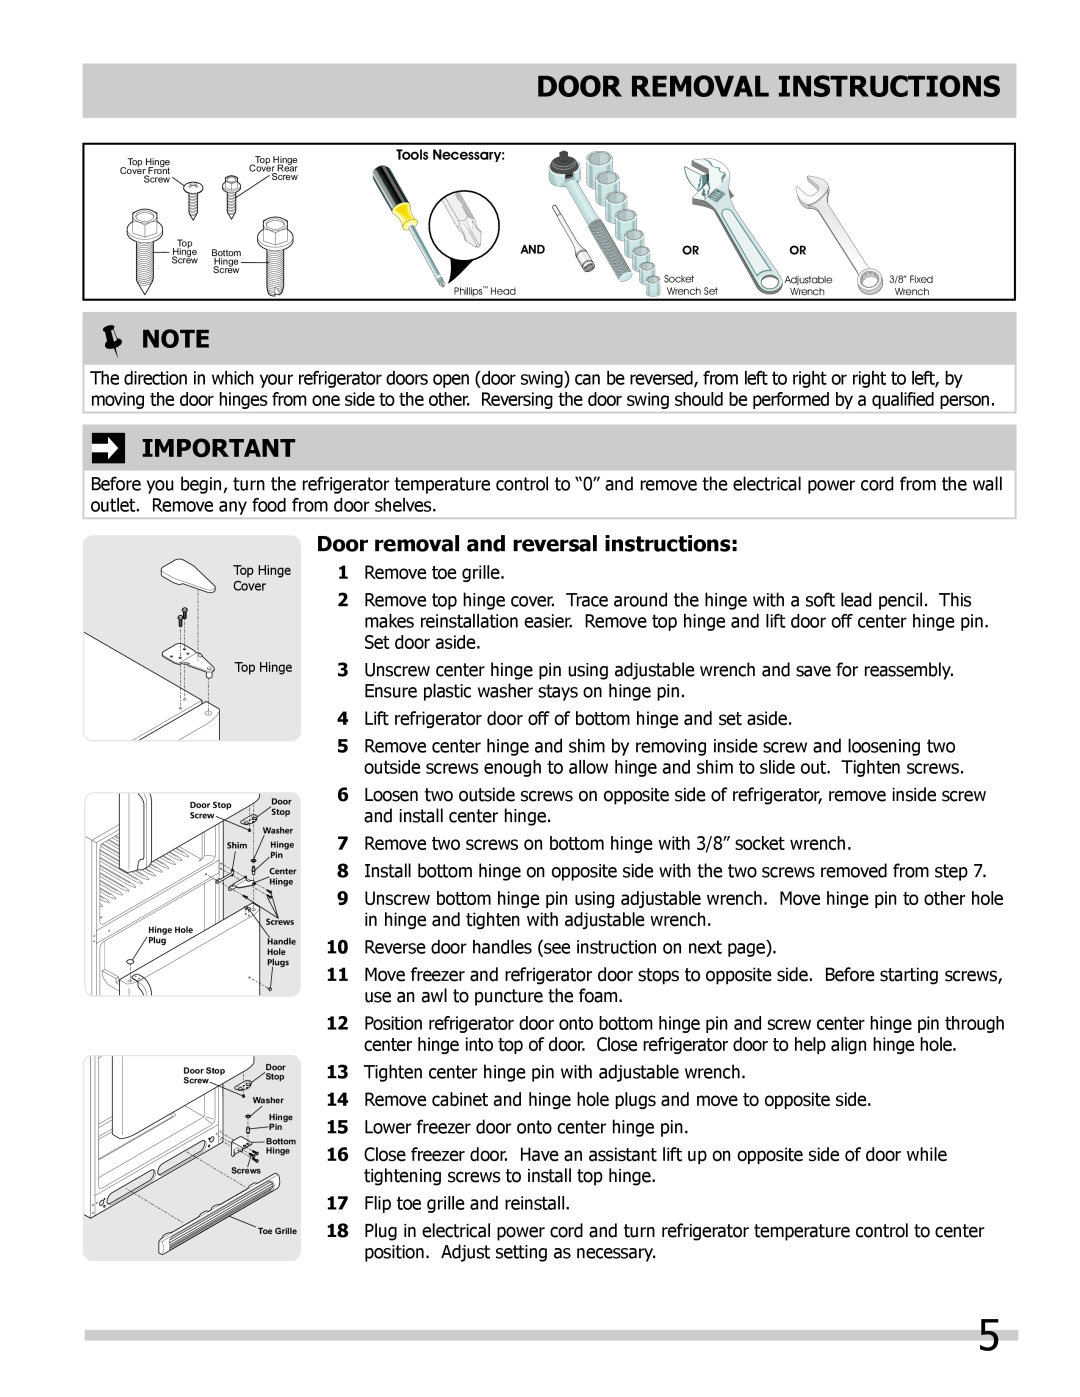 Frigidaire FFHT1817LW, FFHT1817LB, FFHT1814LM Door Removal Instructions, Door removal and reversal instructions,  Note 